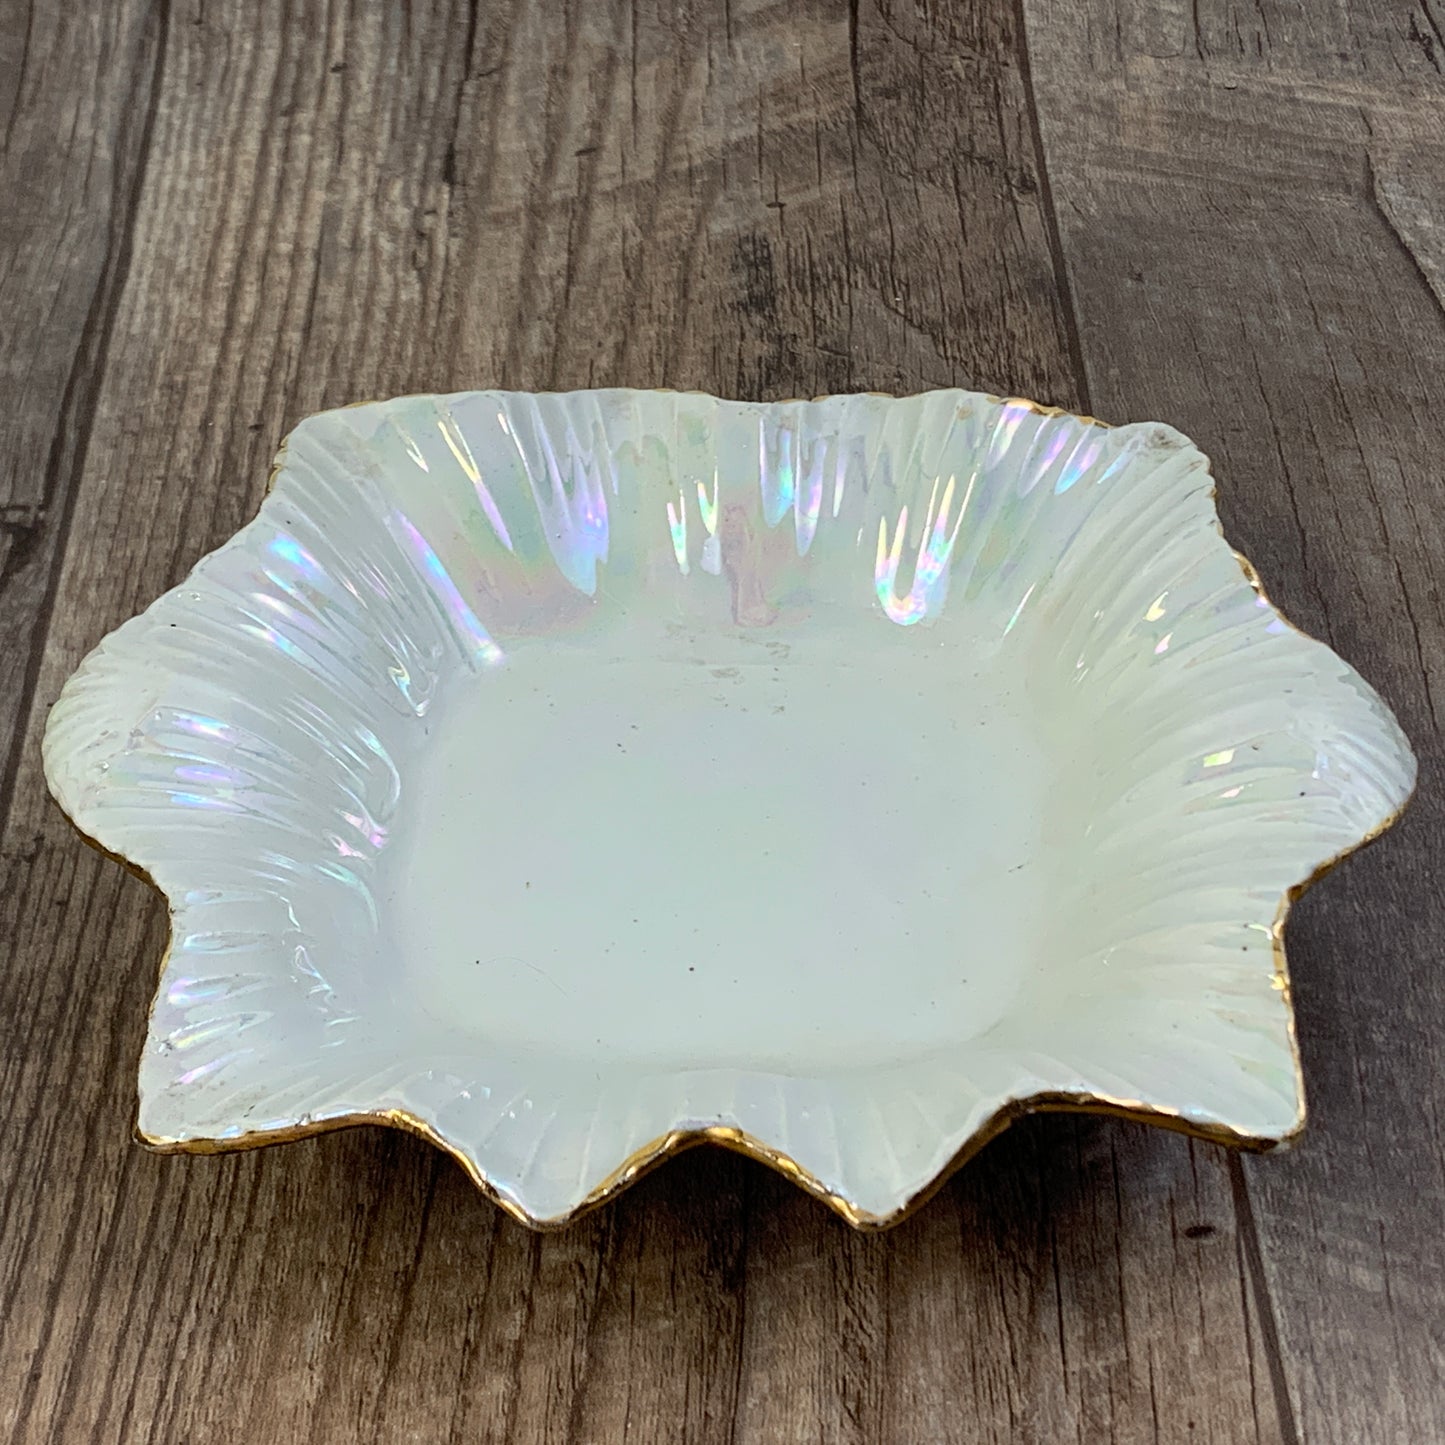 Small Luster Ware Iridescent Porcelain Dish